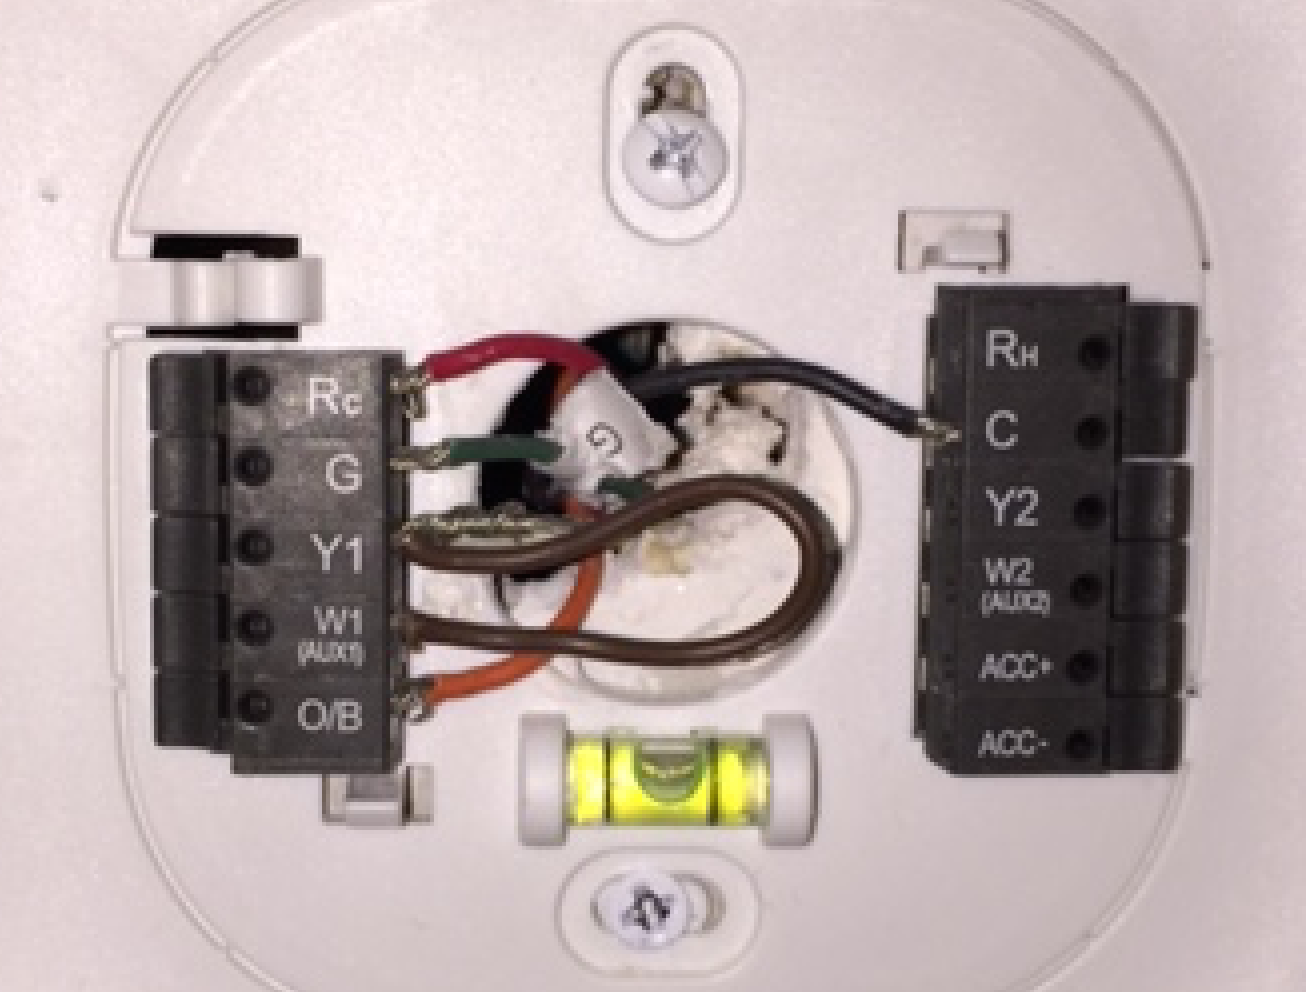 Ecobee Heat Pump Wiring - How to configure your ecobee thermostat for